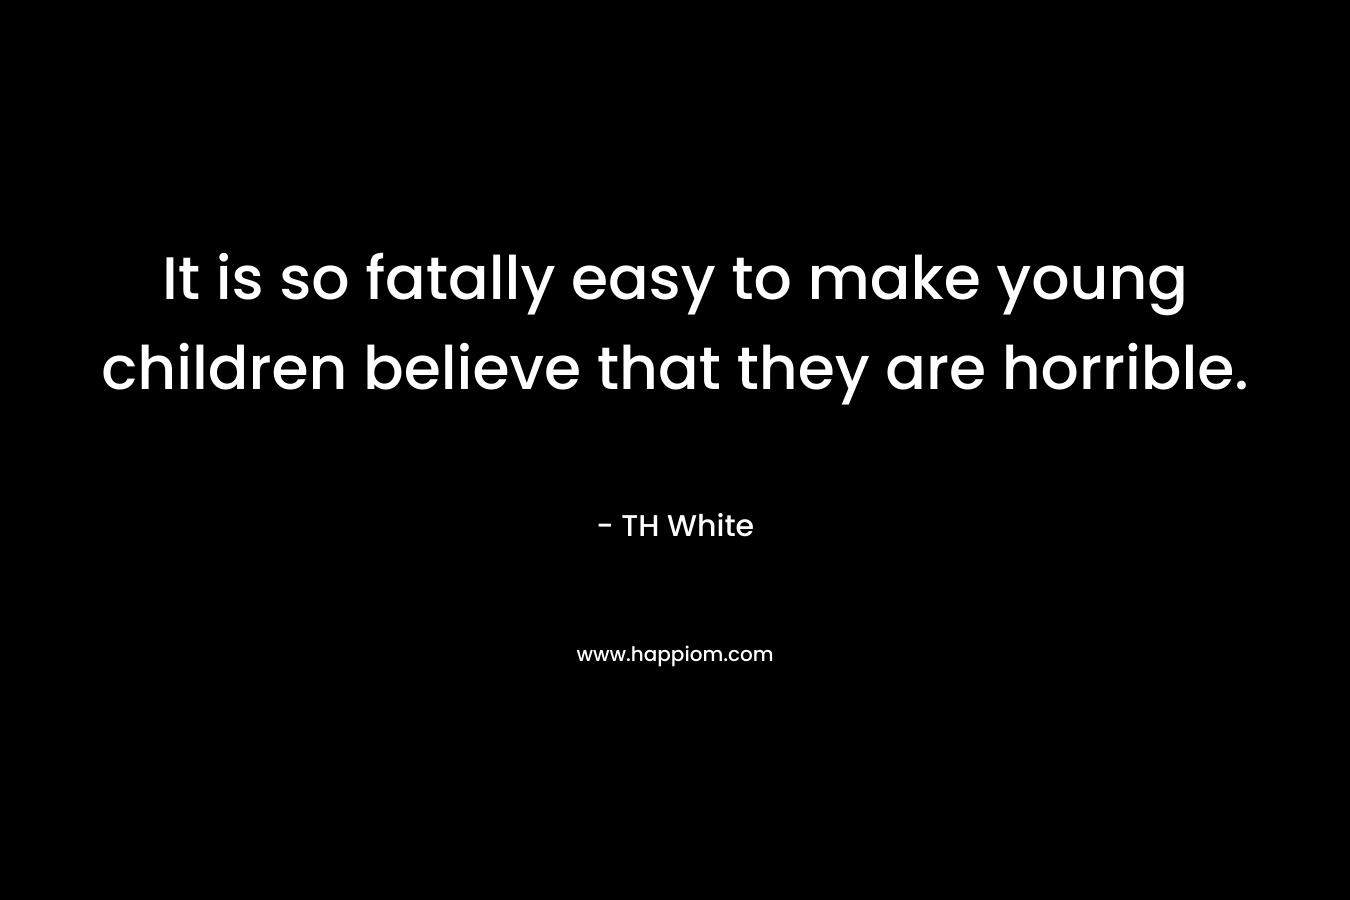 It is so fatally easy to make young children believe that they are horrible. – TH White